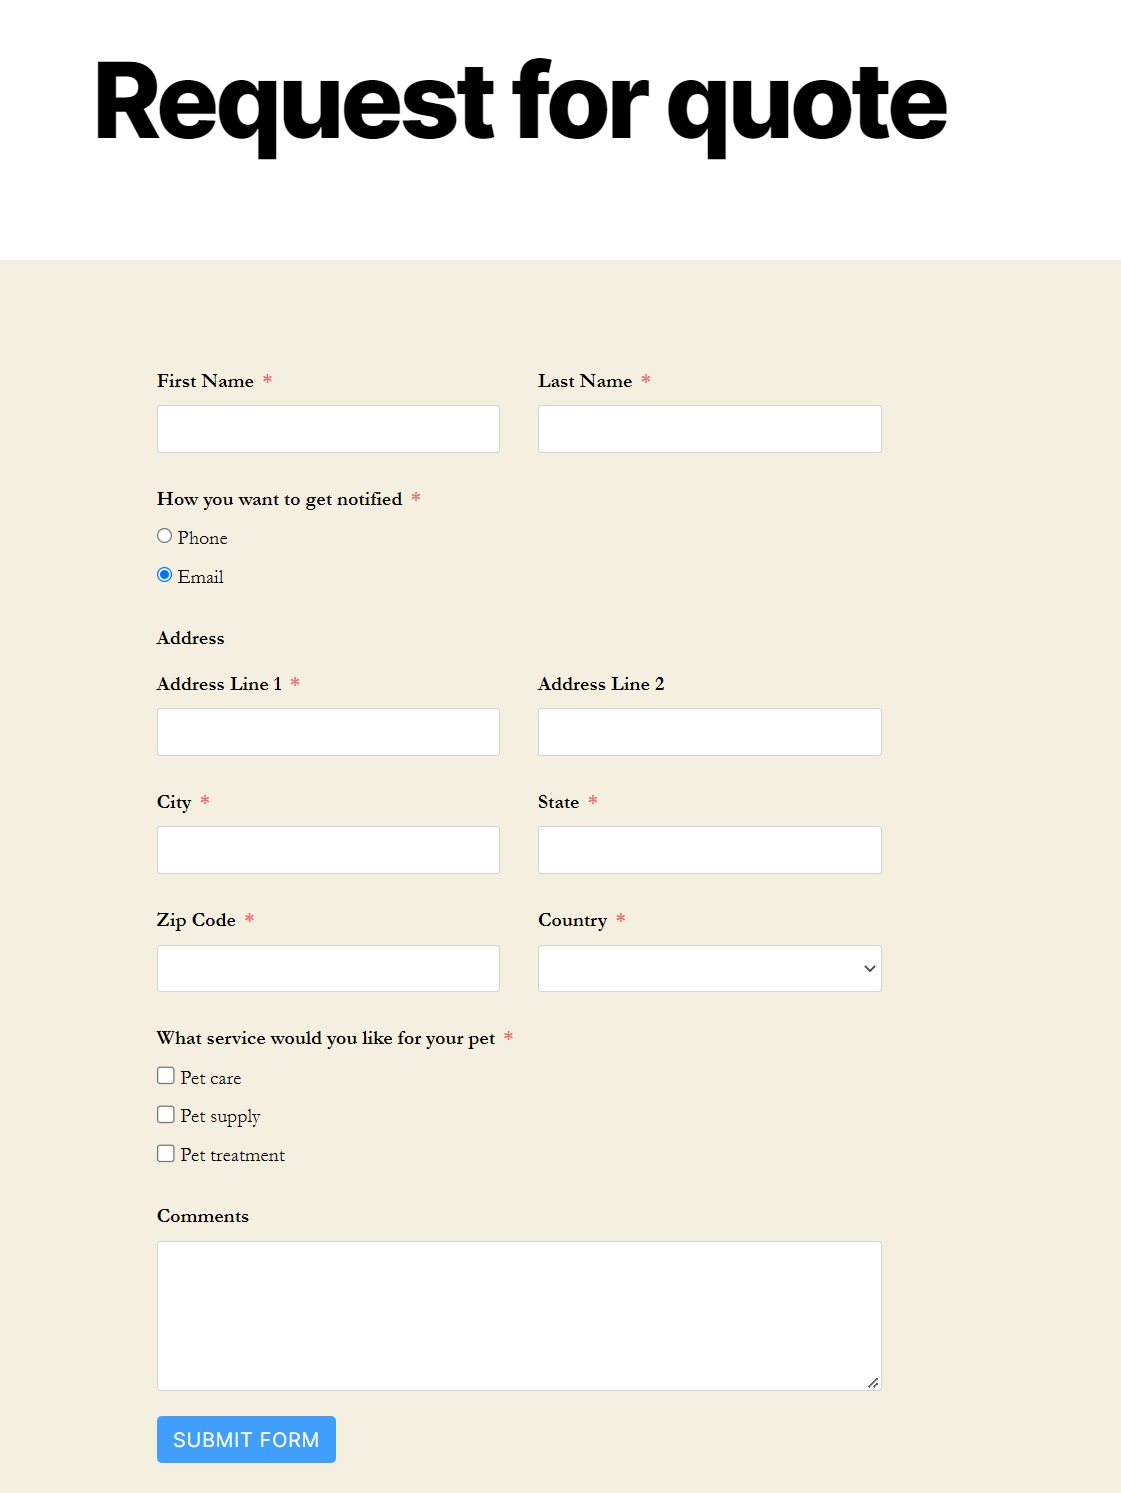 quote request form, quote request form template, quote request form example